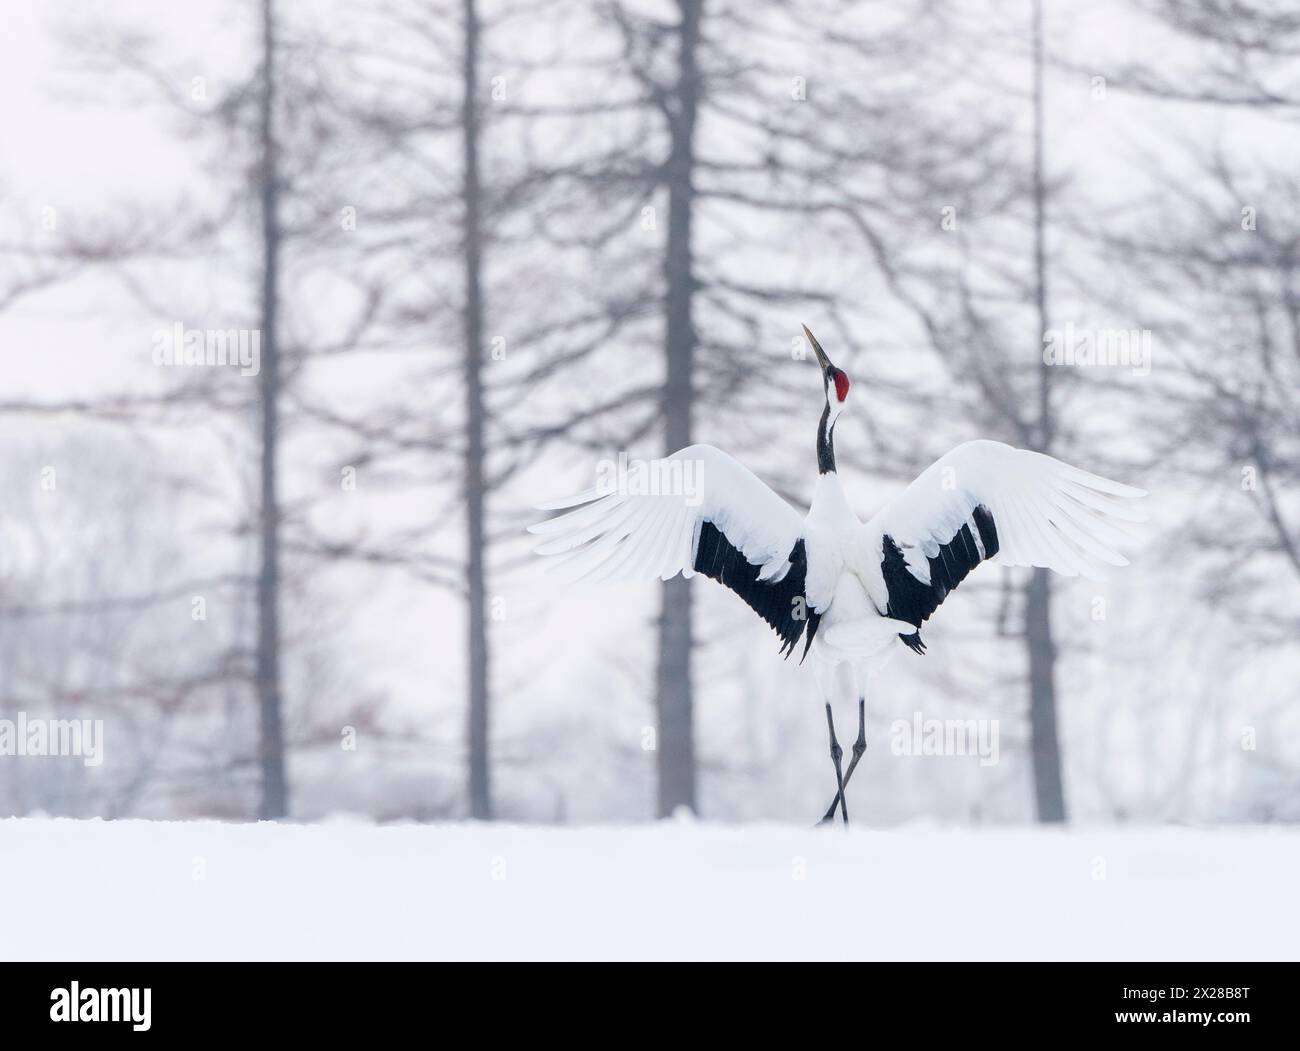 Japanese Red-crowned crane dancing in the snow with winter landscape background Stock Photo